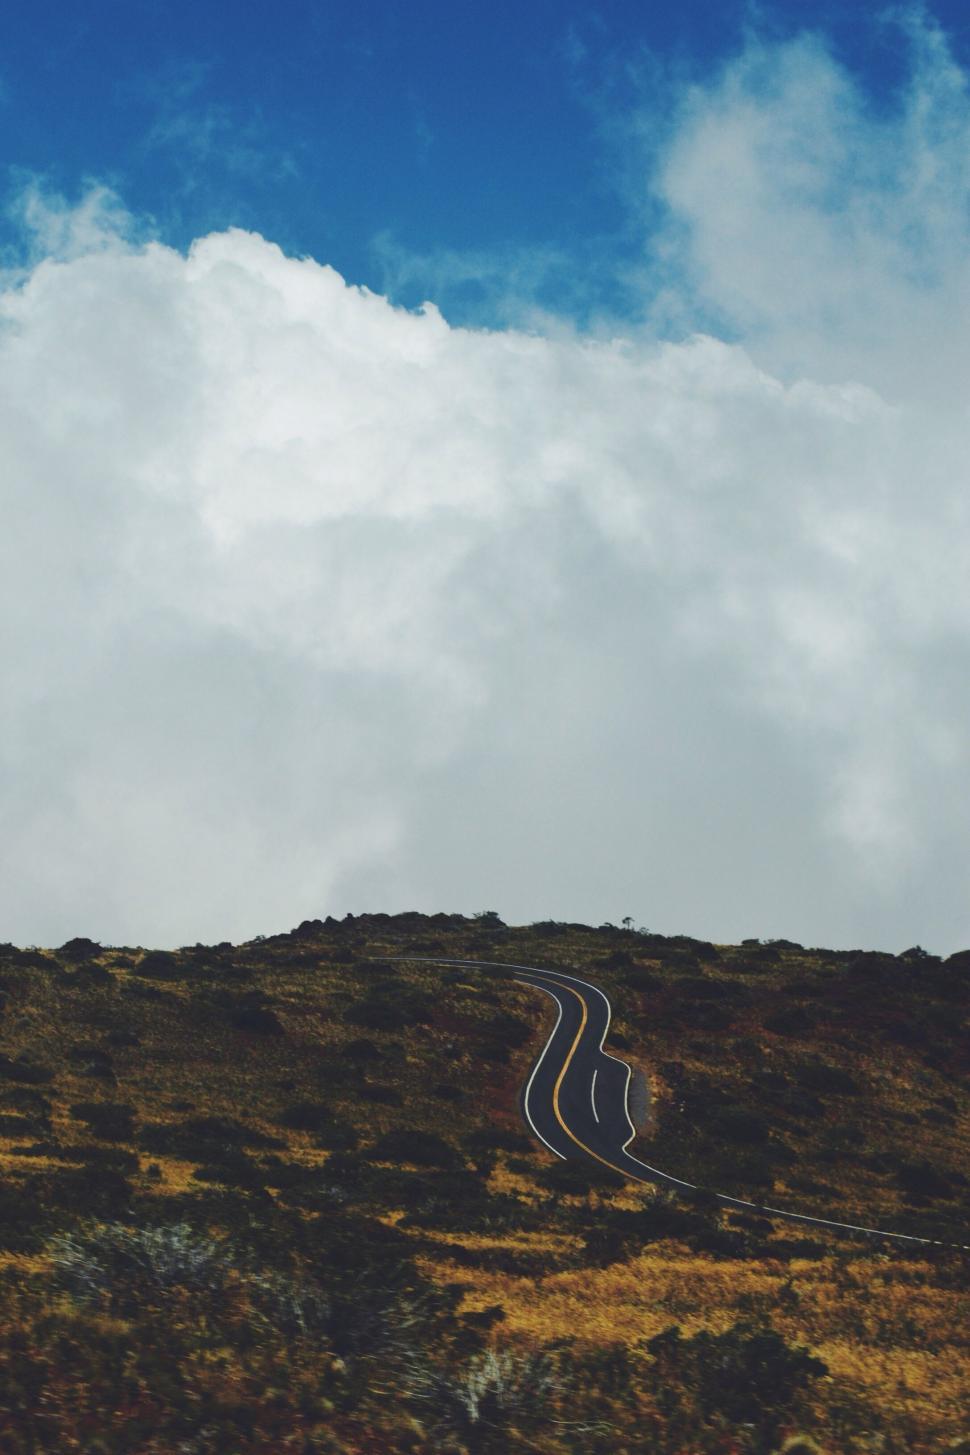 Free Image of Winding Road Ascending Hill Under Cloudy Blue Sky 